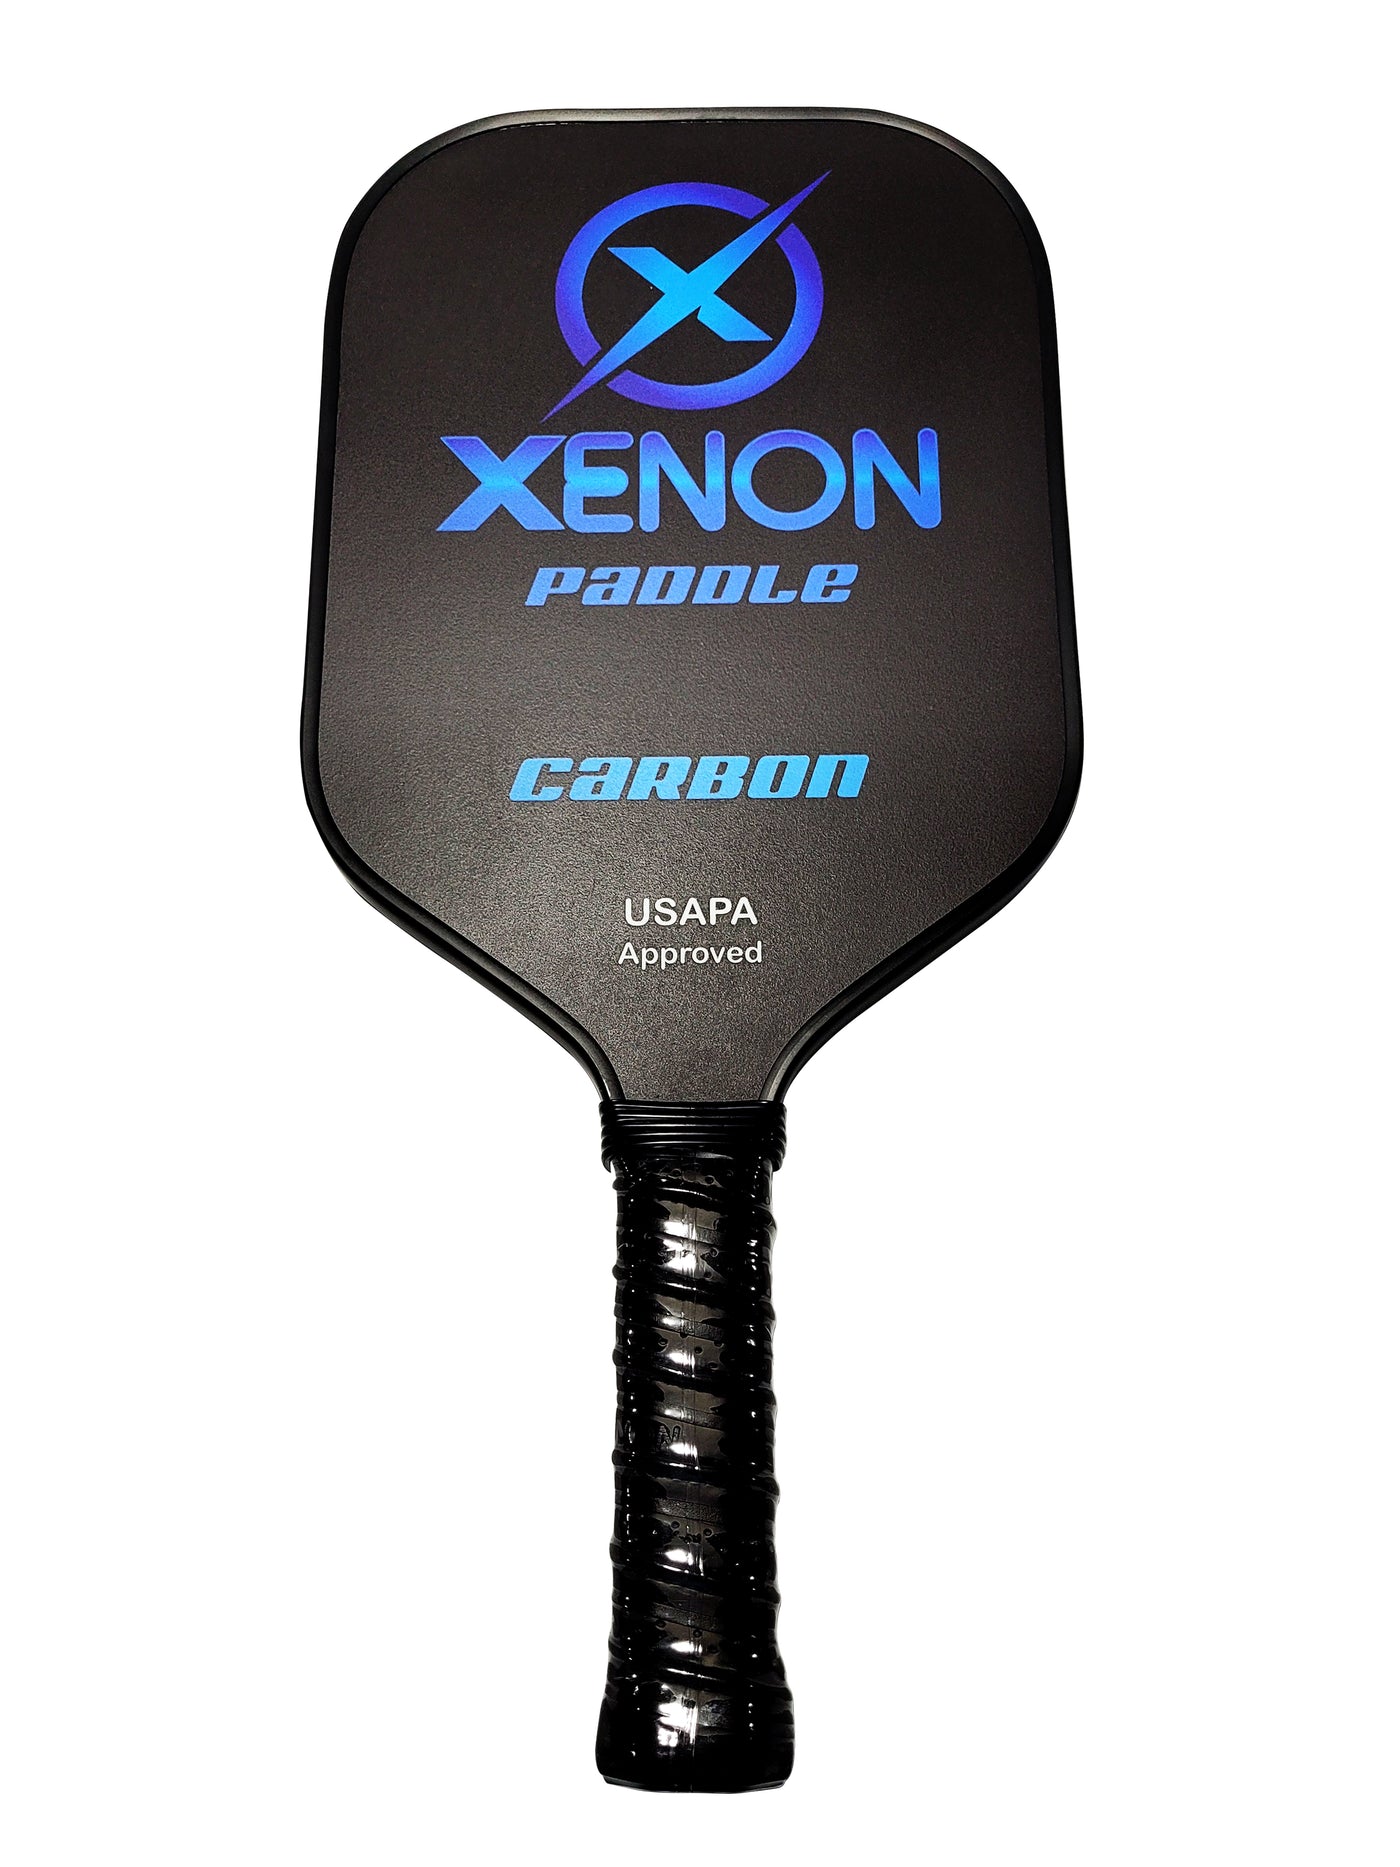 Xenon Paddle Carbon Black Pickleball Paddle USAPA Approved for beginners or advanced players